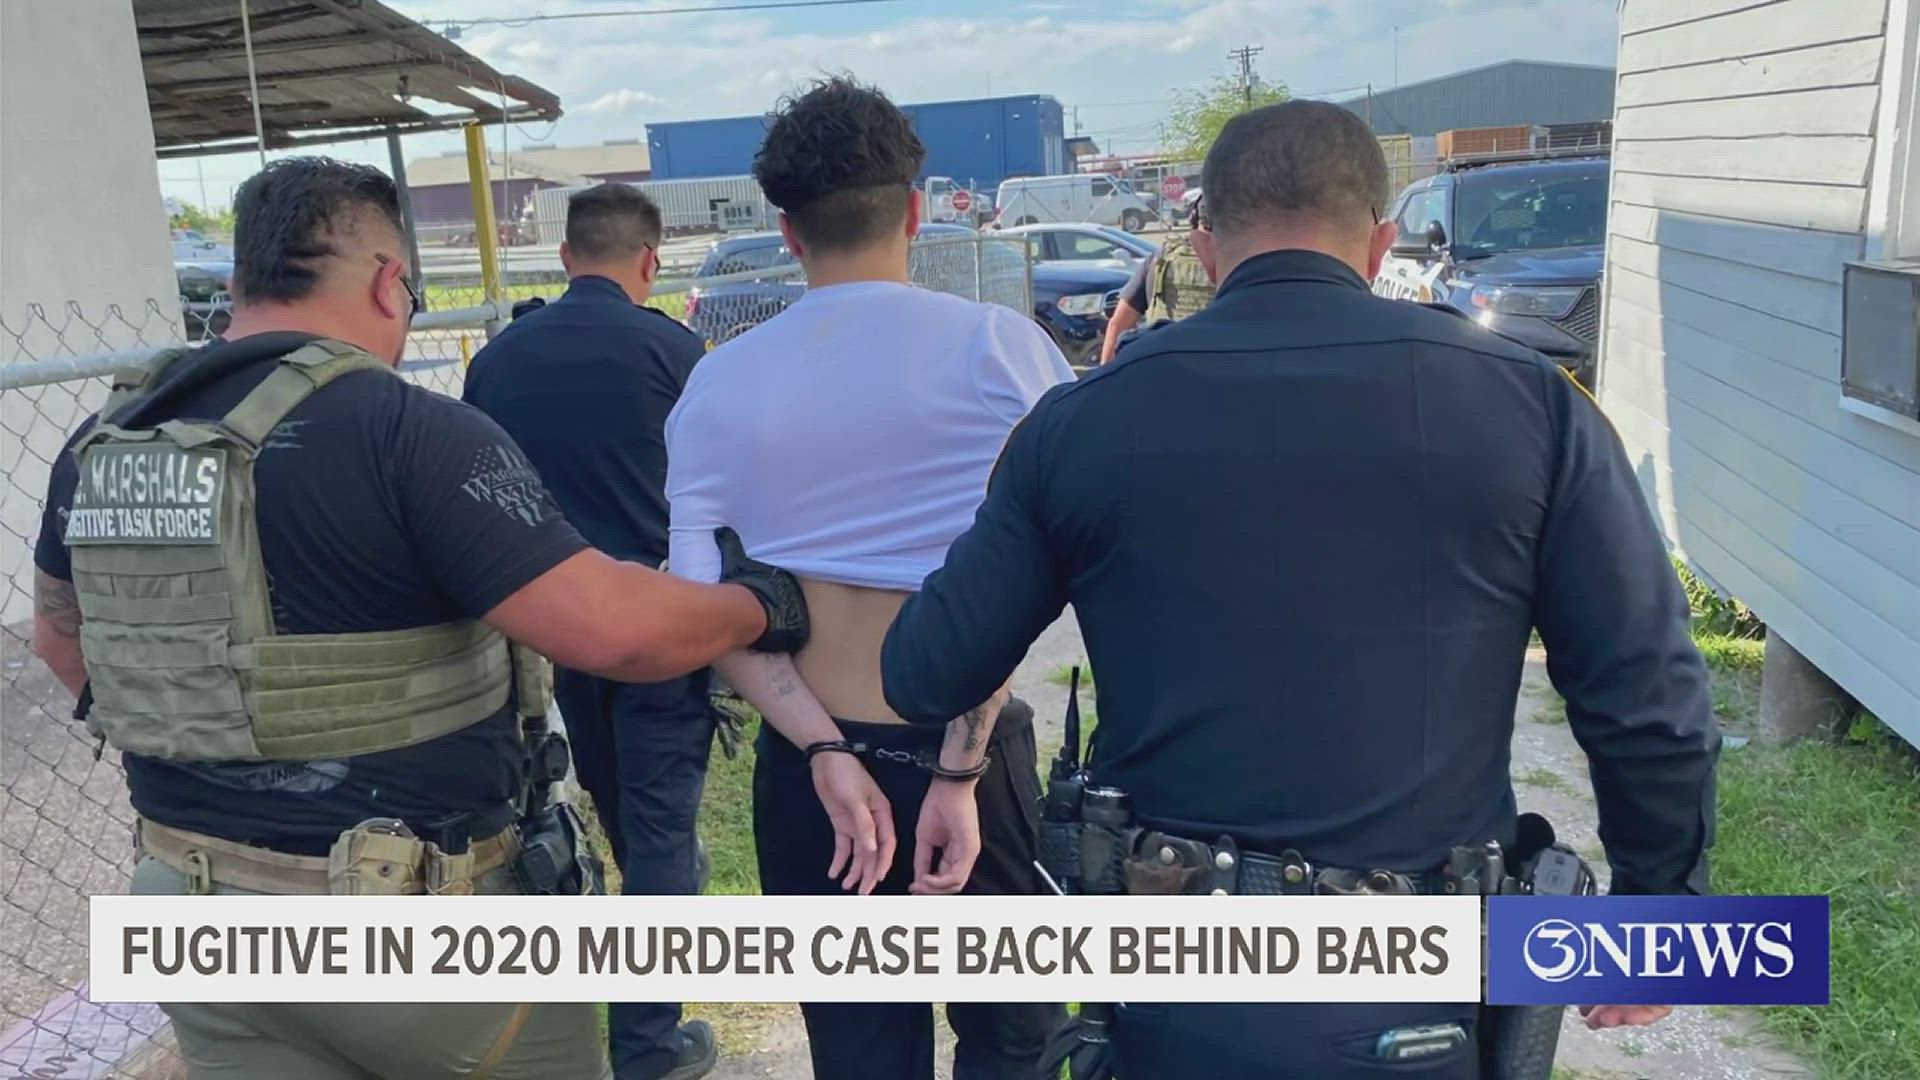 Jose Garcia had evaded law enforcement since 2021, when he cut off his ankle monitor and fled.